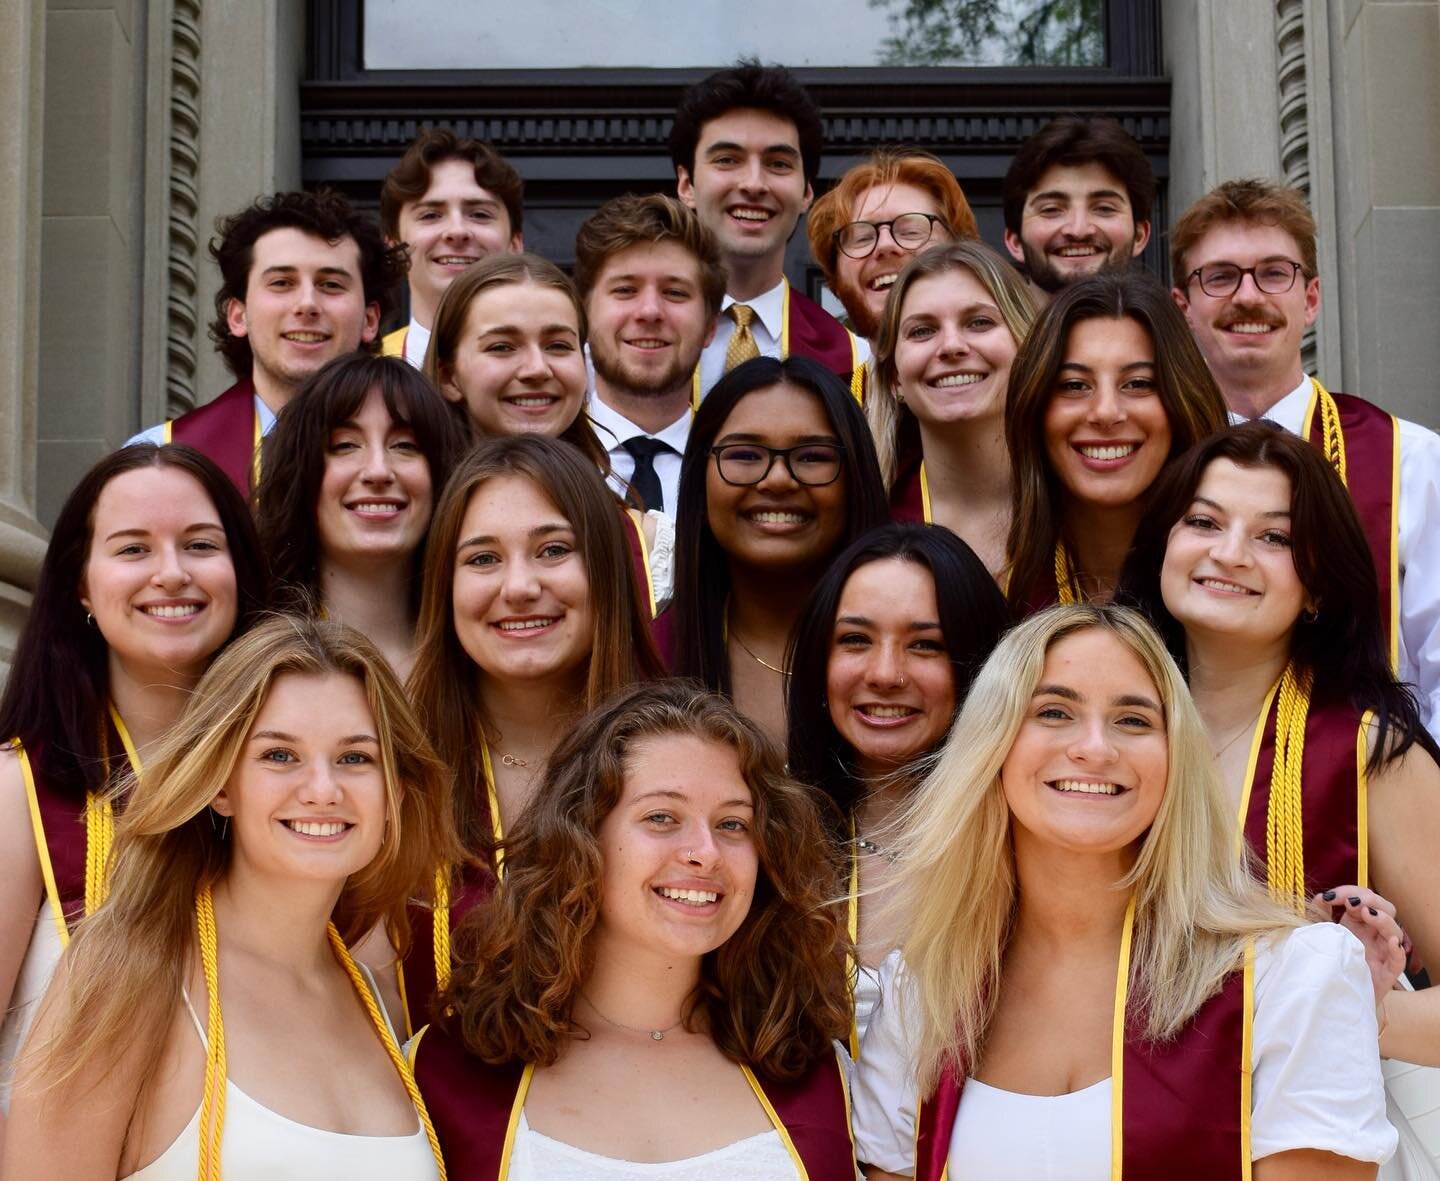 Congratulations to our class of 2023 graduated seniors!!🎓 We are very proud of all your accomplishments and will miss you SO much. You&rsquo;ve made friendships that will last a life time &amp; we wish you the best with whatever is next💛 Go gophers